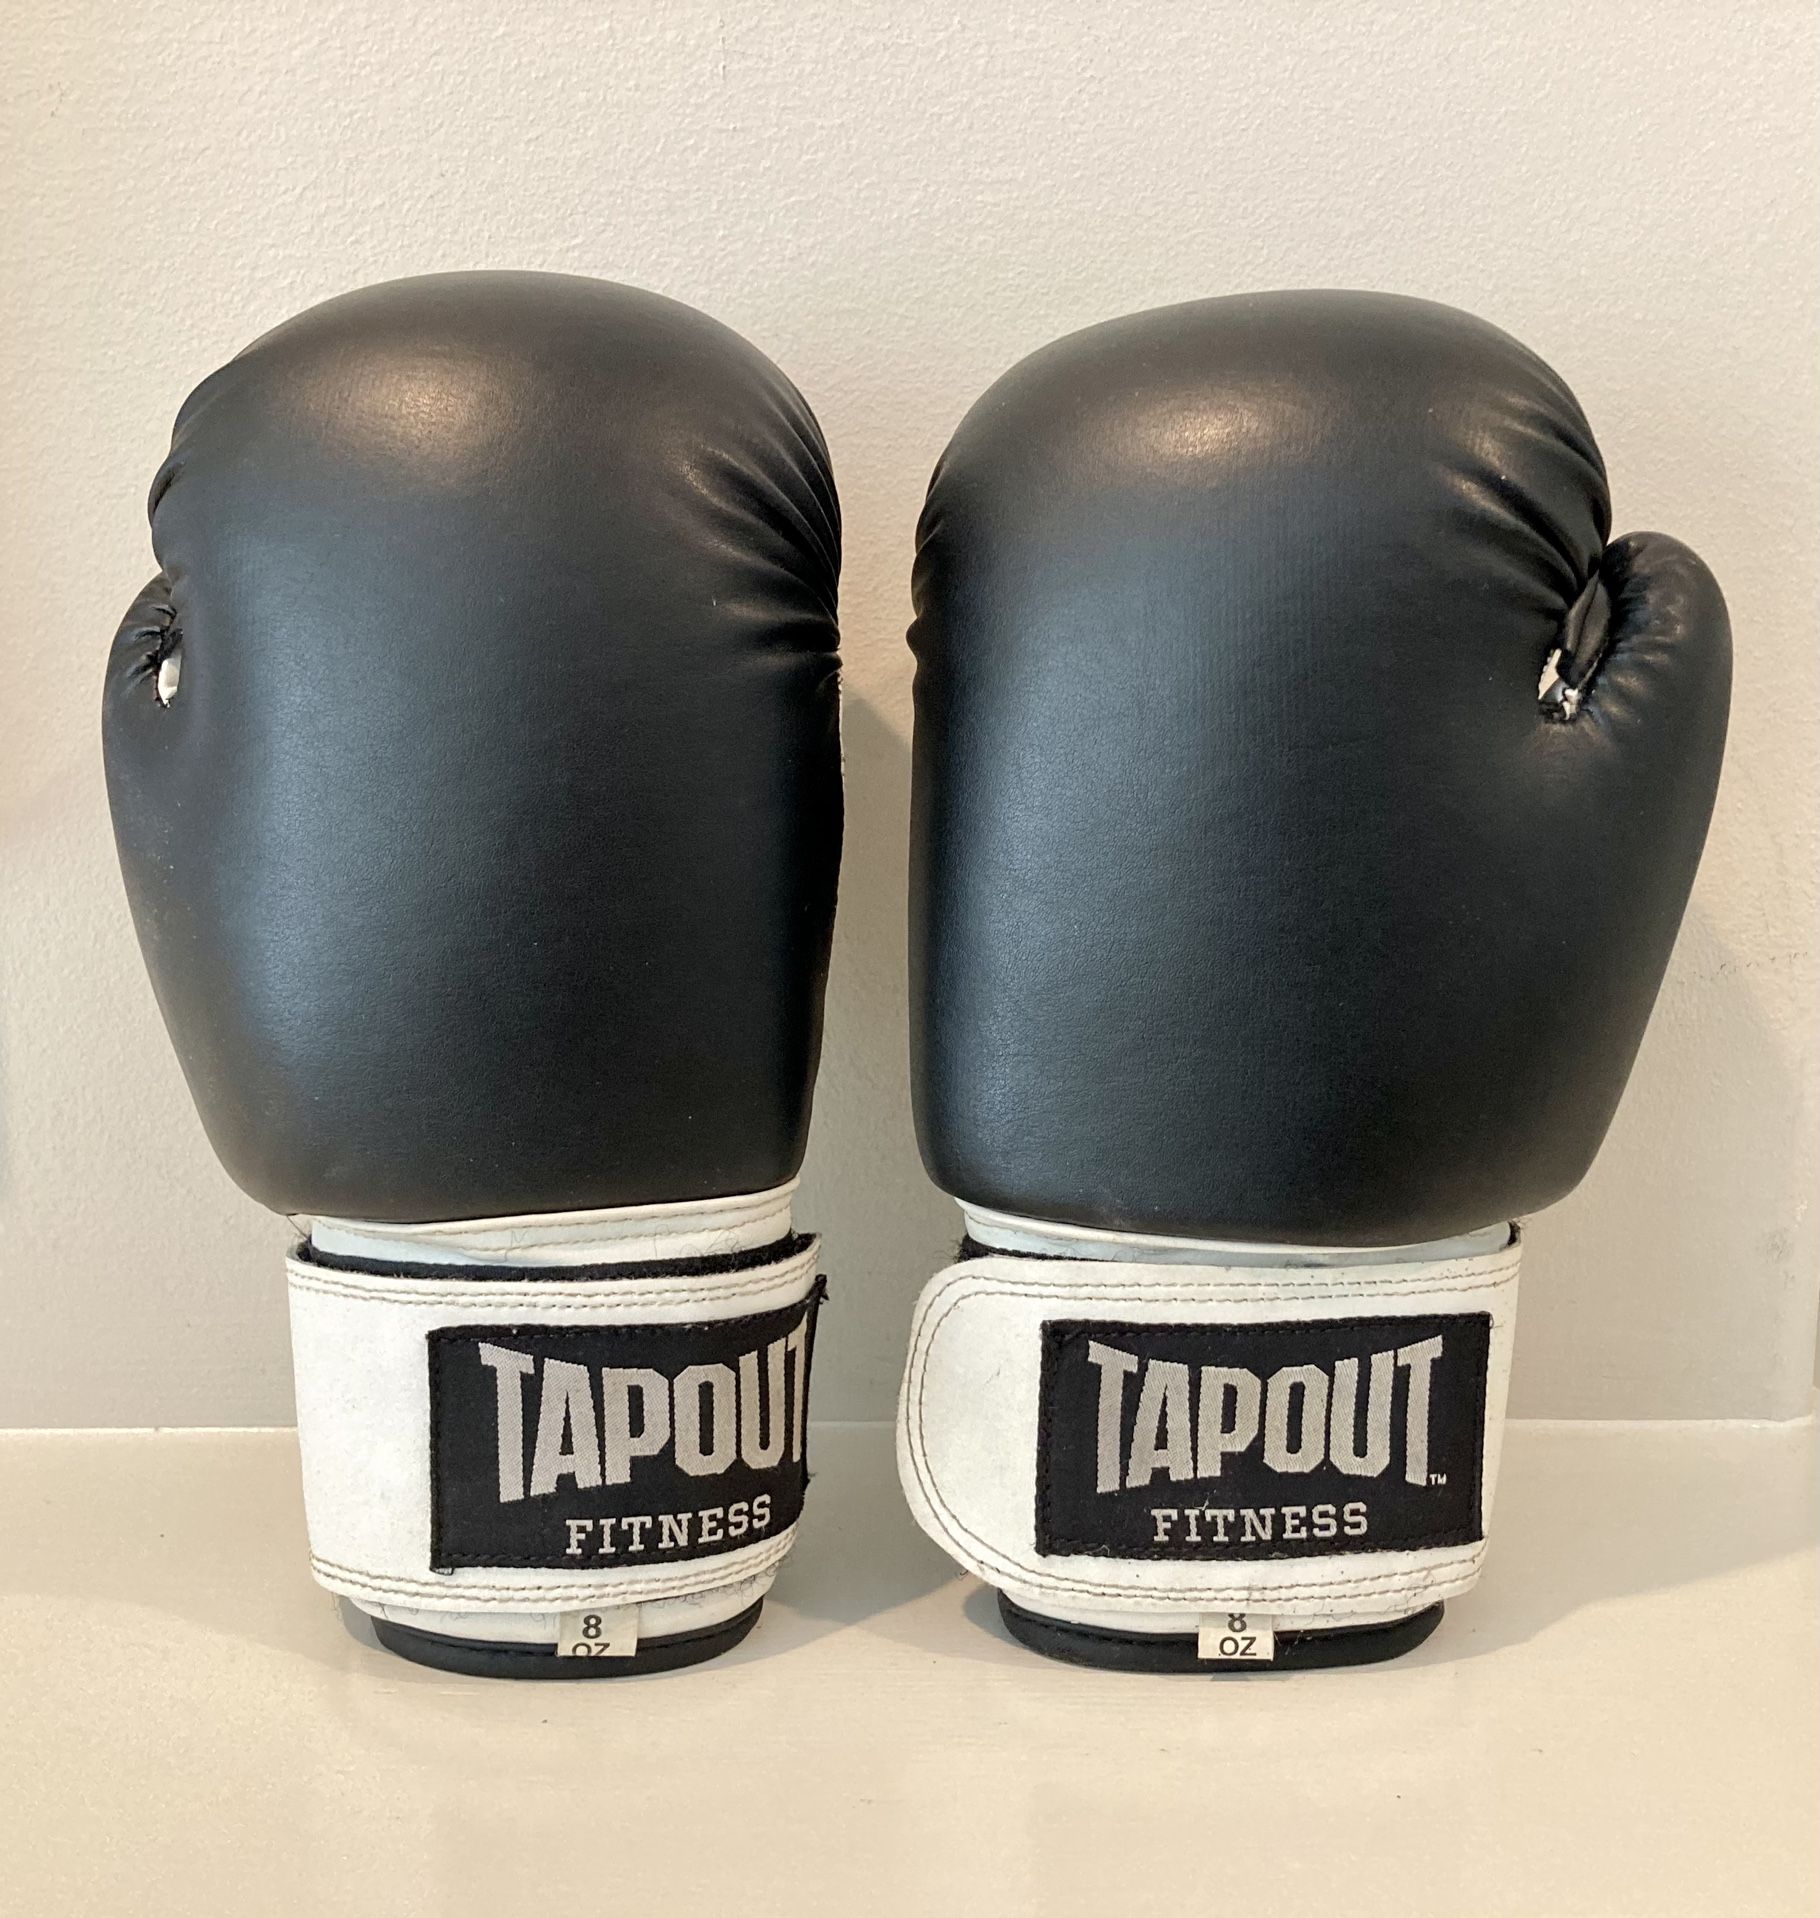 TAPOUT FITNESS 8 OUNCE BOXING MMA CARDIO TRAINING EXERCISE GLOVES